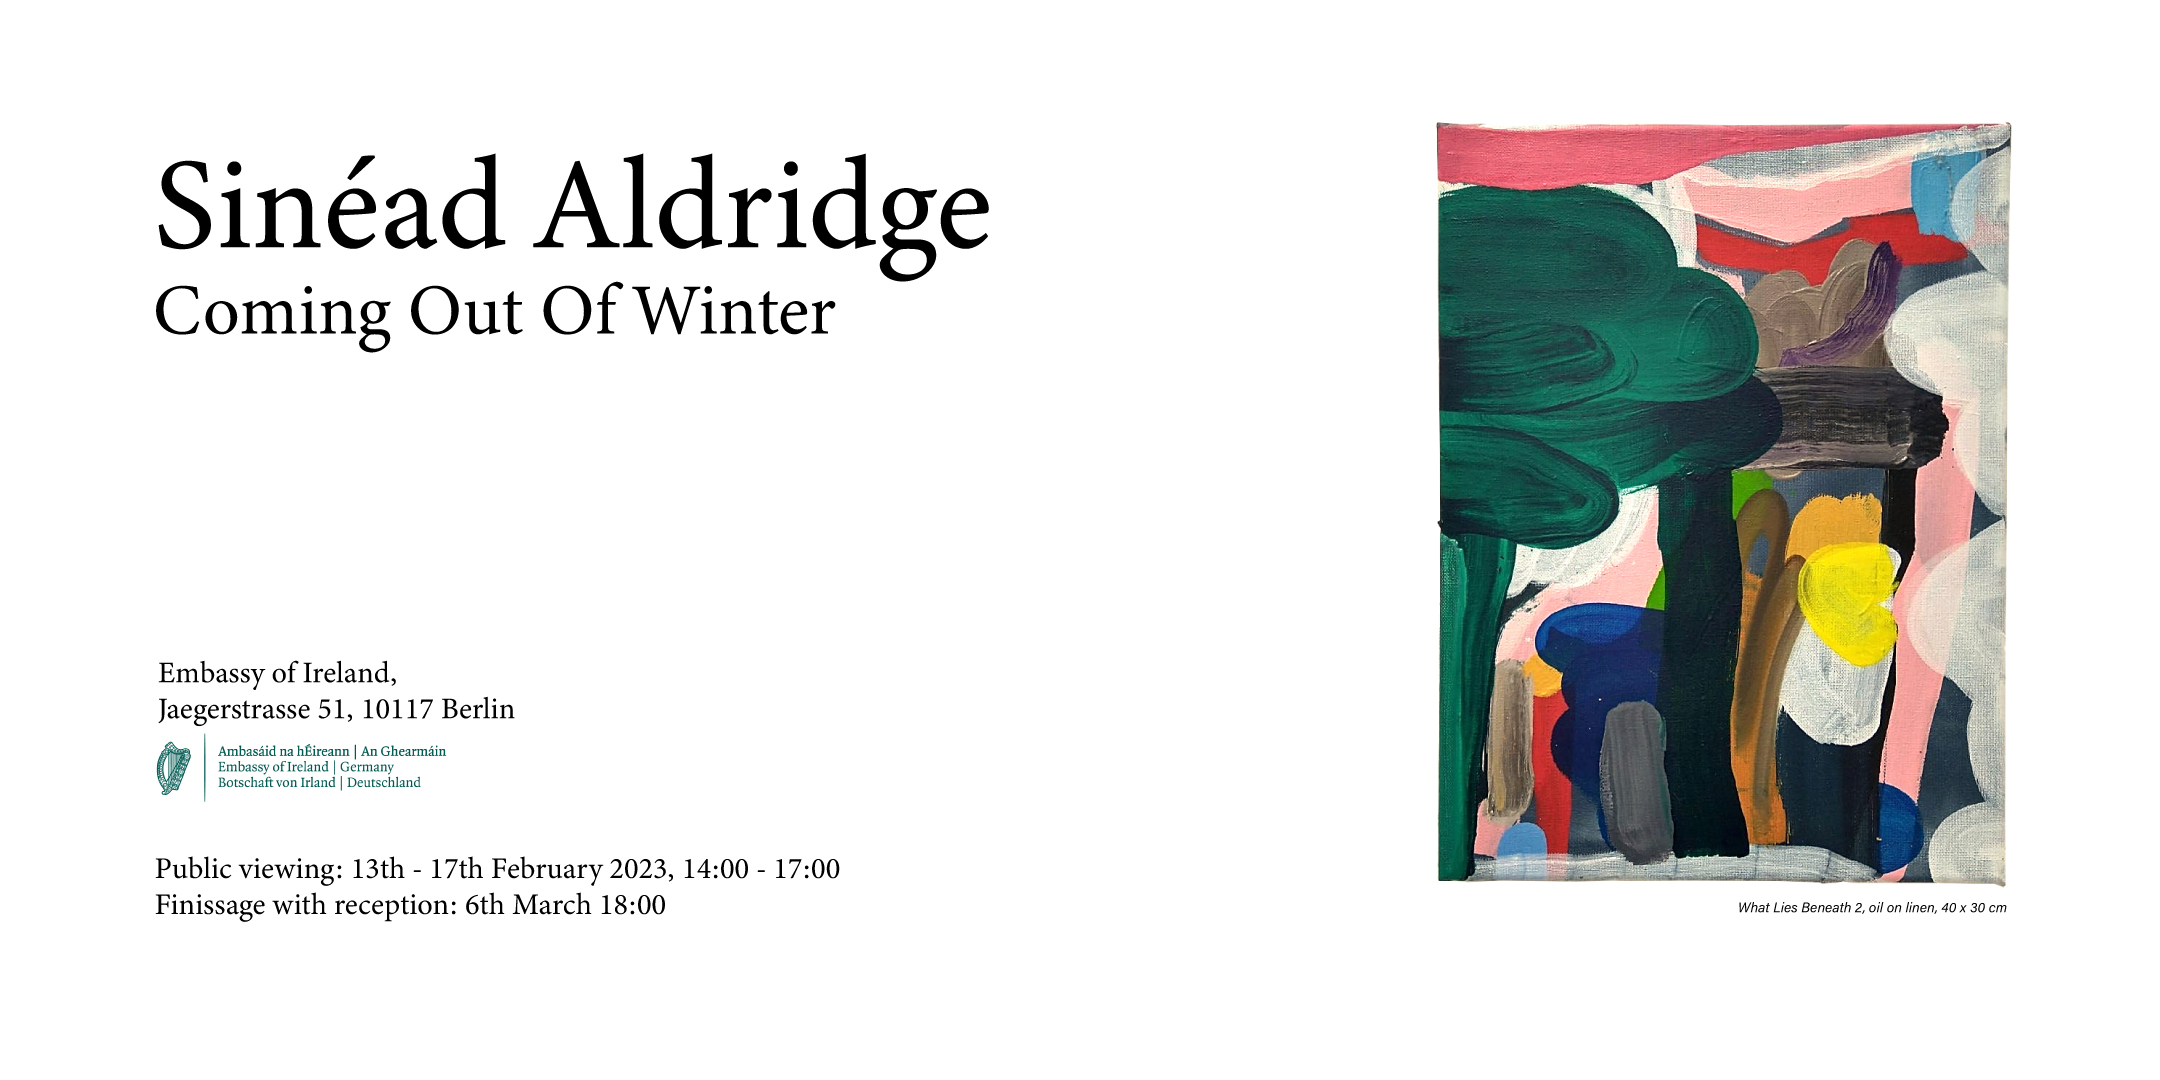 Coming Out of Winter exhibition of works from Sinéad Aldridge